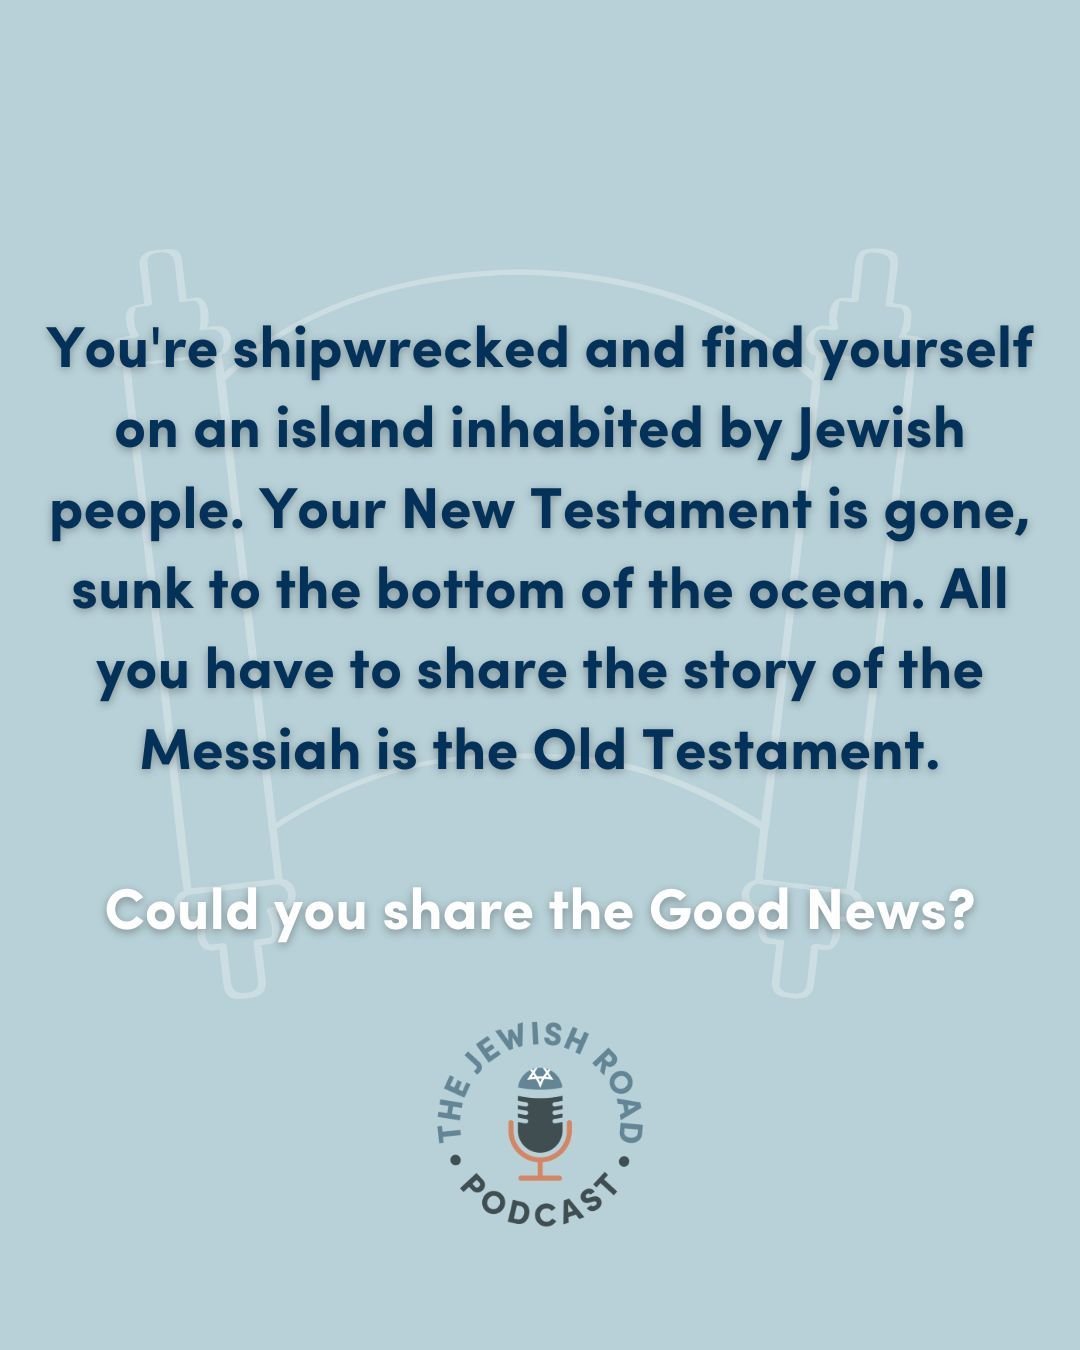 Not sure? Check out episode 101 of The Jewish Road Podcast, where we dive into how to share the Good News of the Messiah using the Old Testament, or as it's known in Jewish tradition, the Tanakh.

Link in bio.

#otgoodnews #thejewishroad #thejewishro